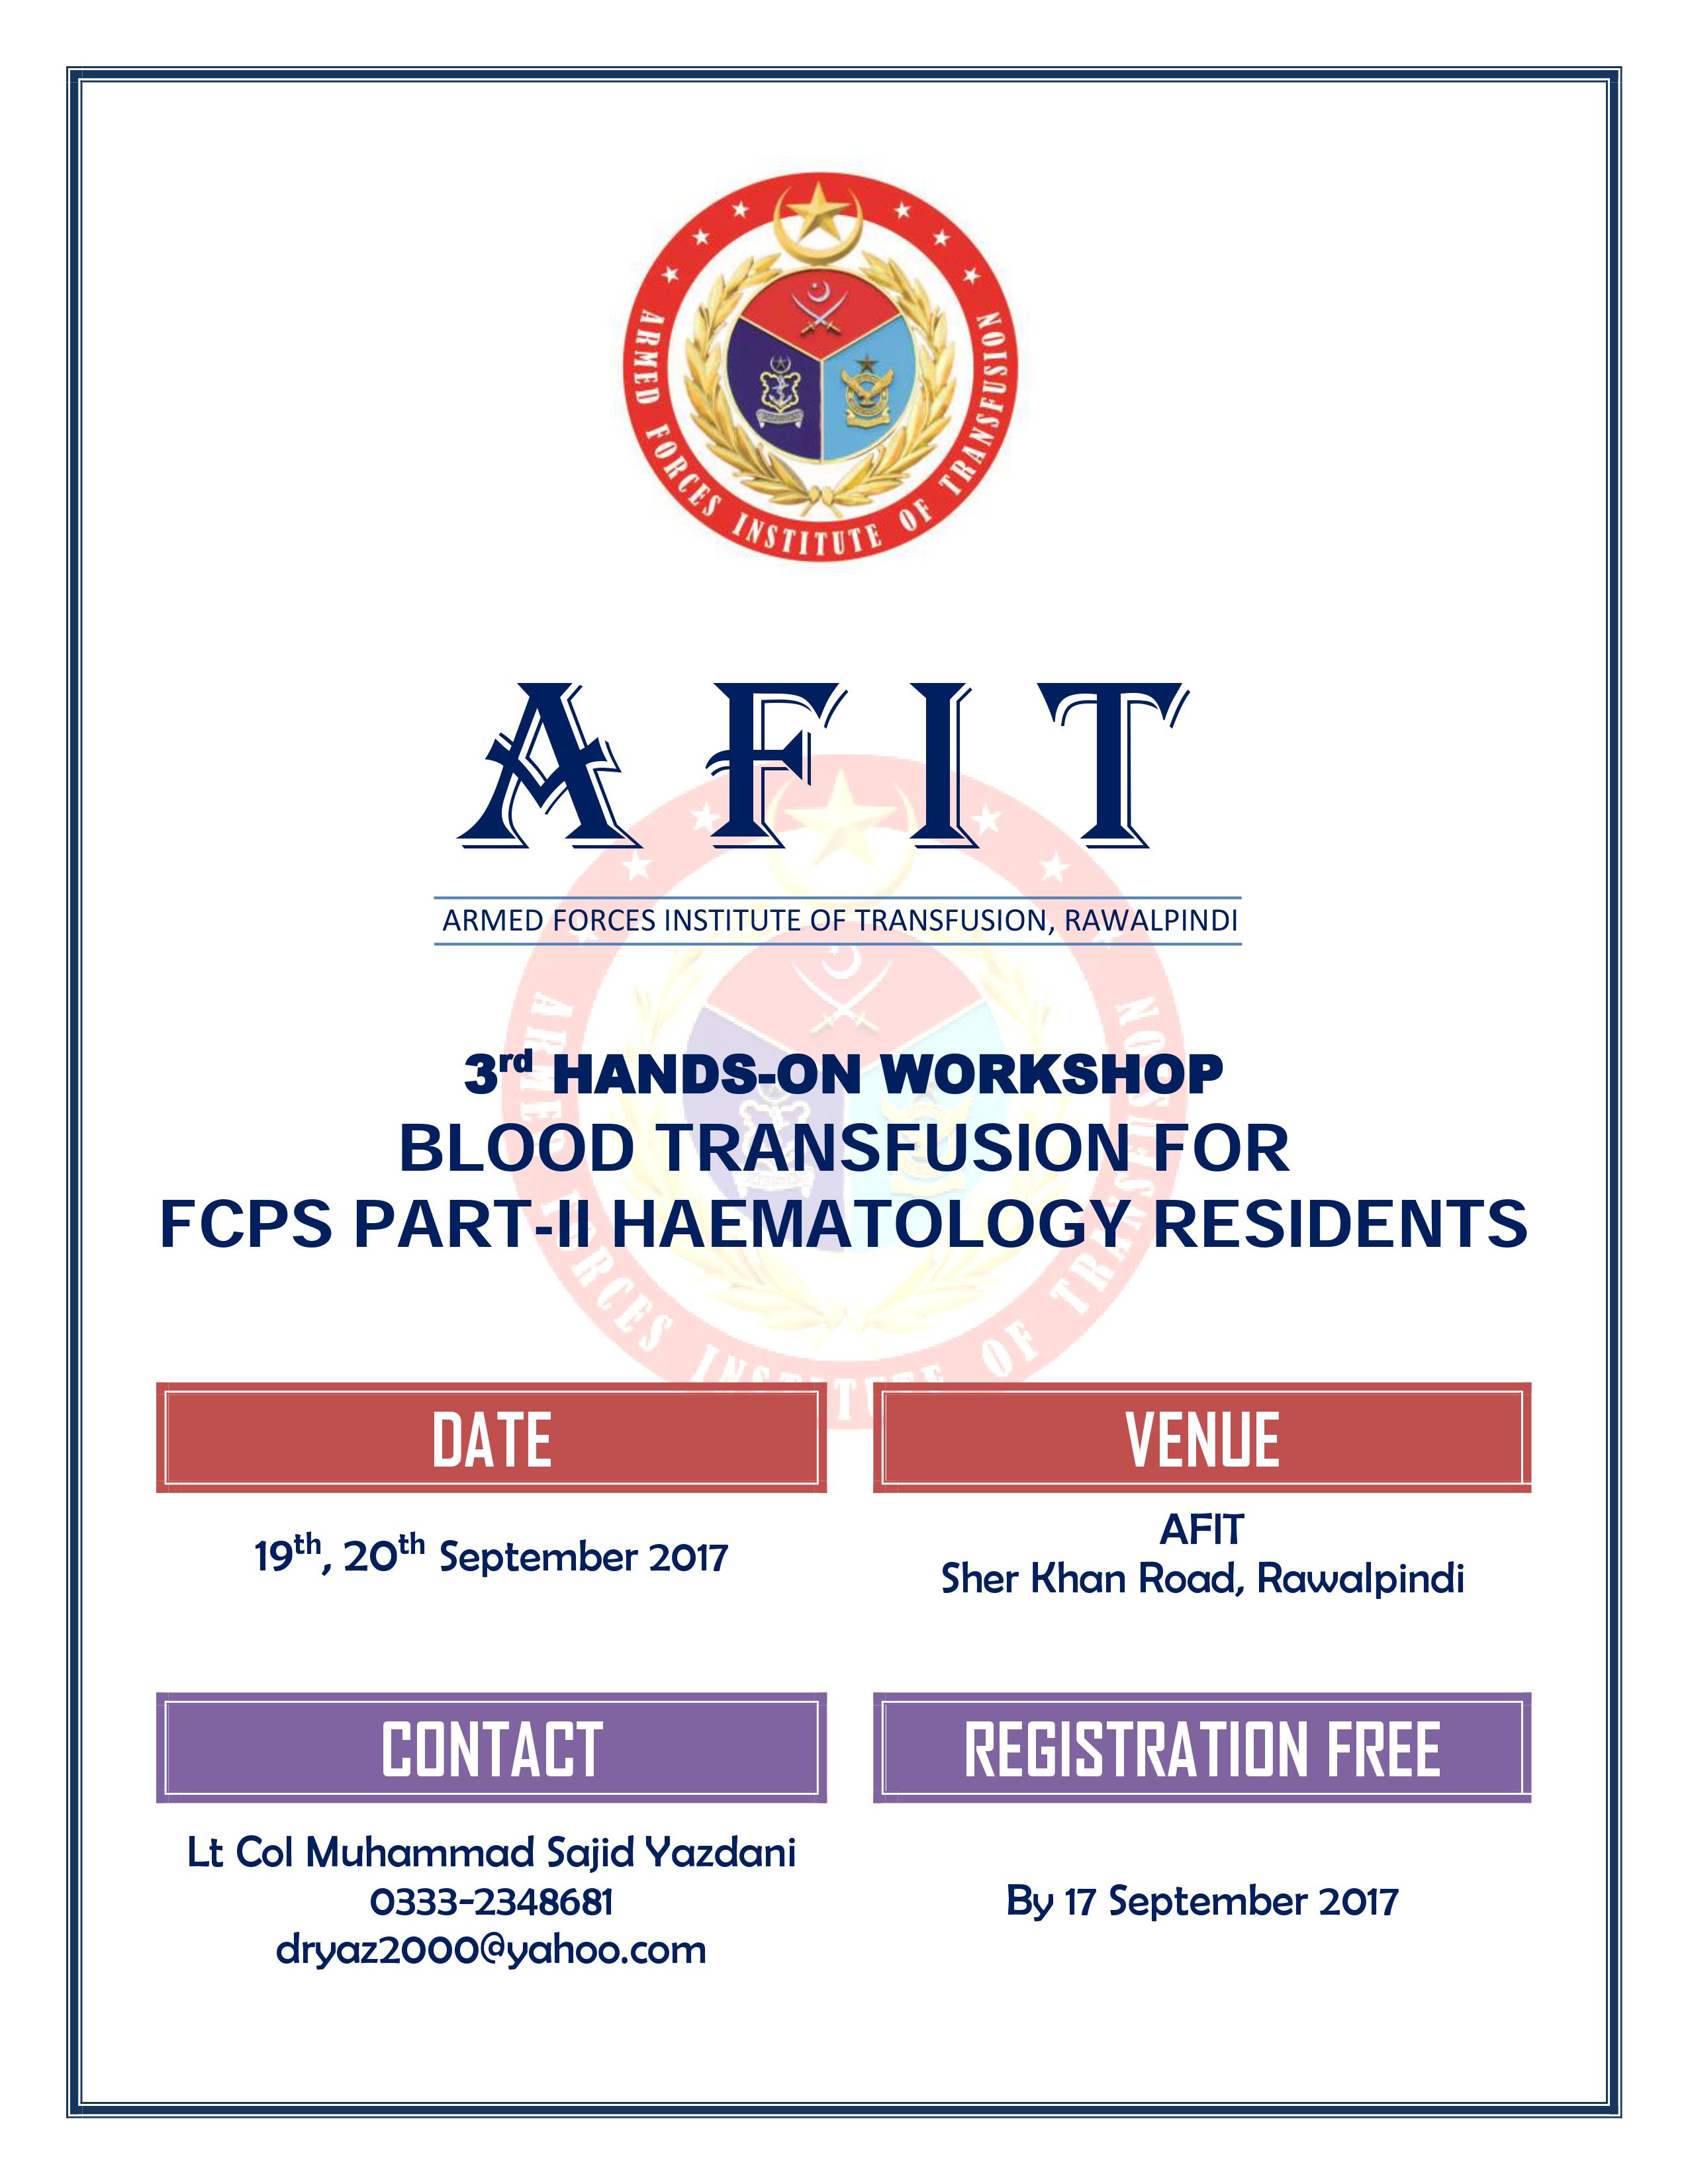 [PSH Workshop] 3rd Hand-On Blood Transfusion for FCPS Part-II Haematology Residents - 19-20 Sep 2017